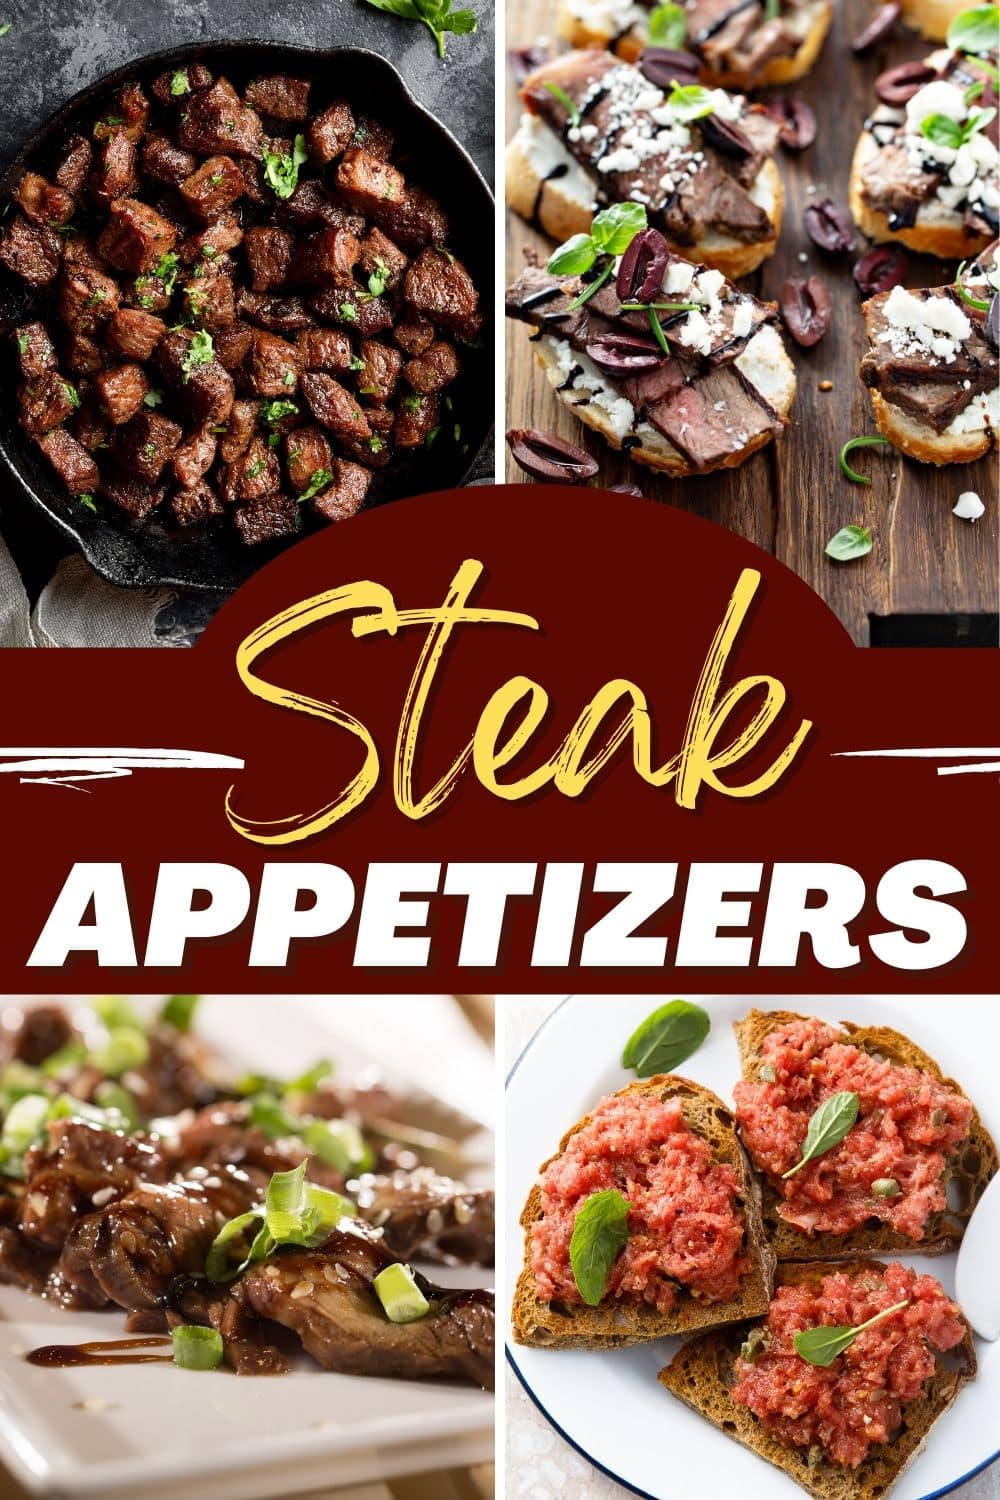 17 Easy Steak Appetizers To Wow Your Guests - Insanely Good